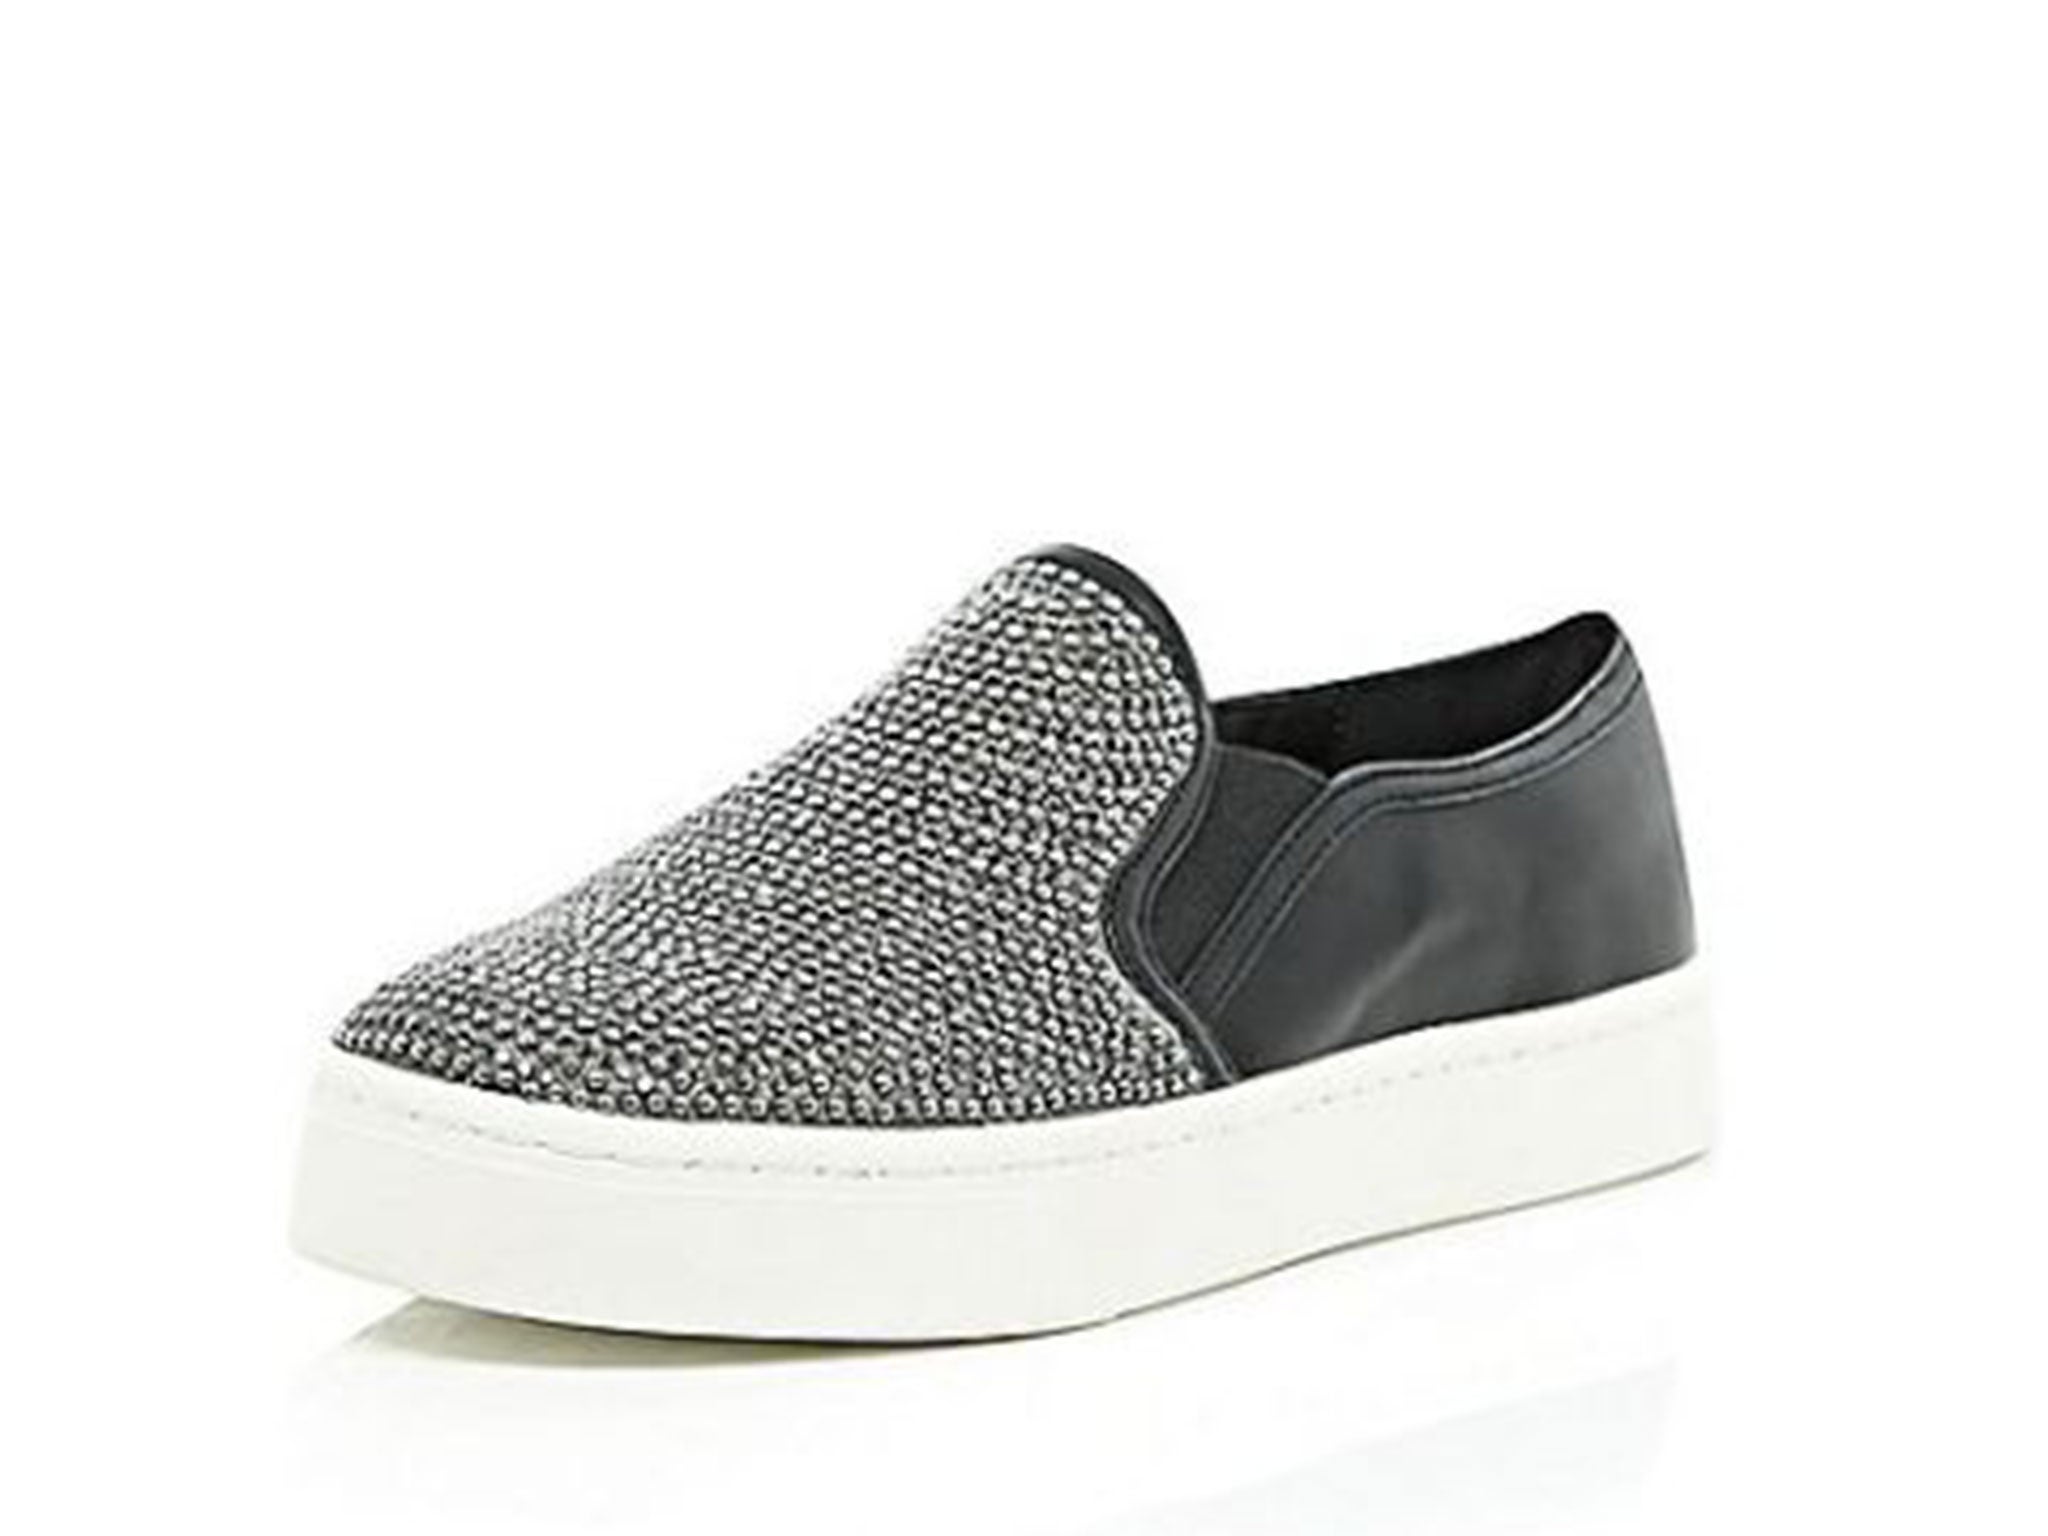 comfortable slip on trainers